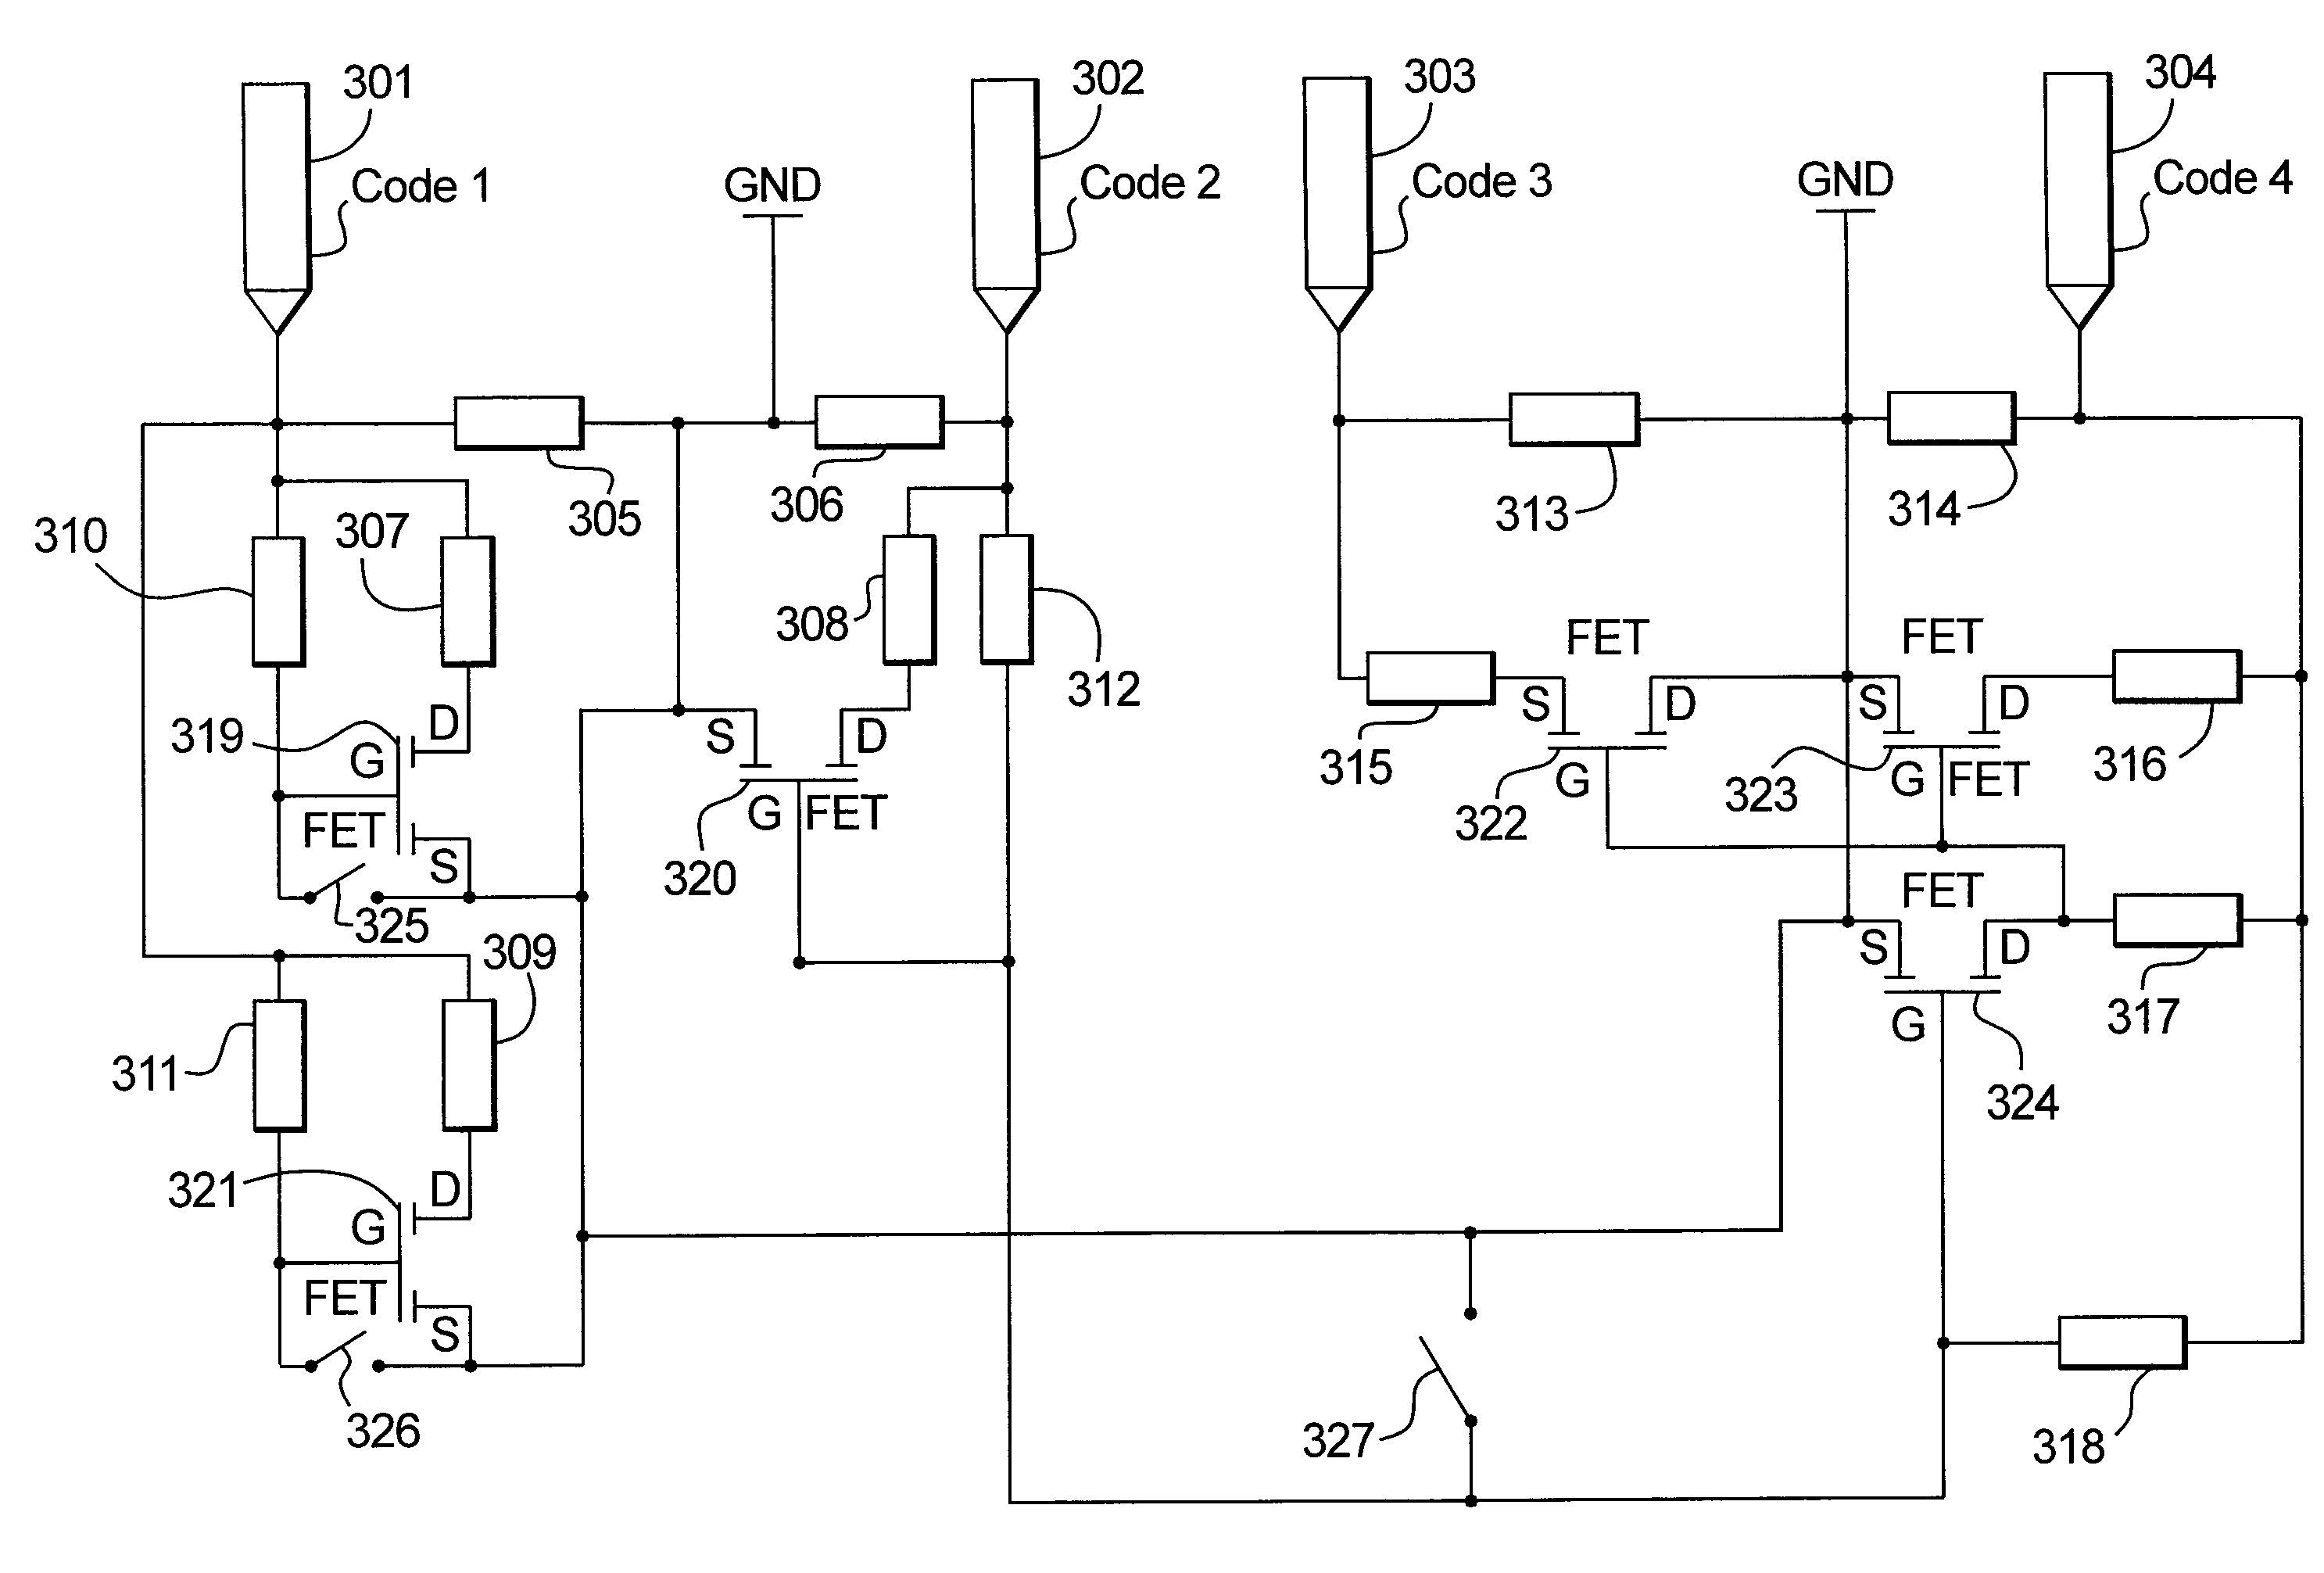 Identification code circuit for receiving coil in magnetic resonance imaging system